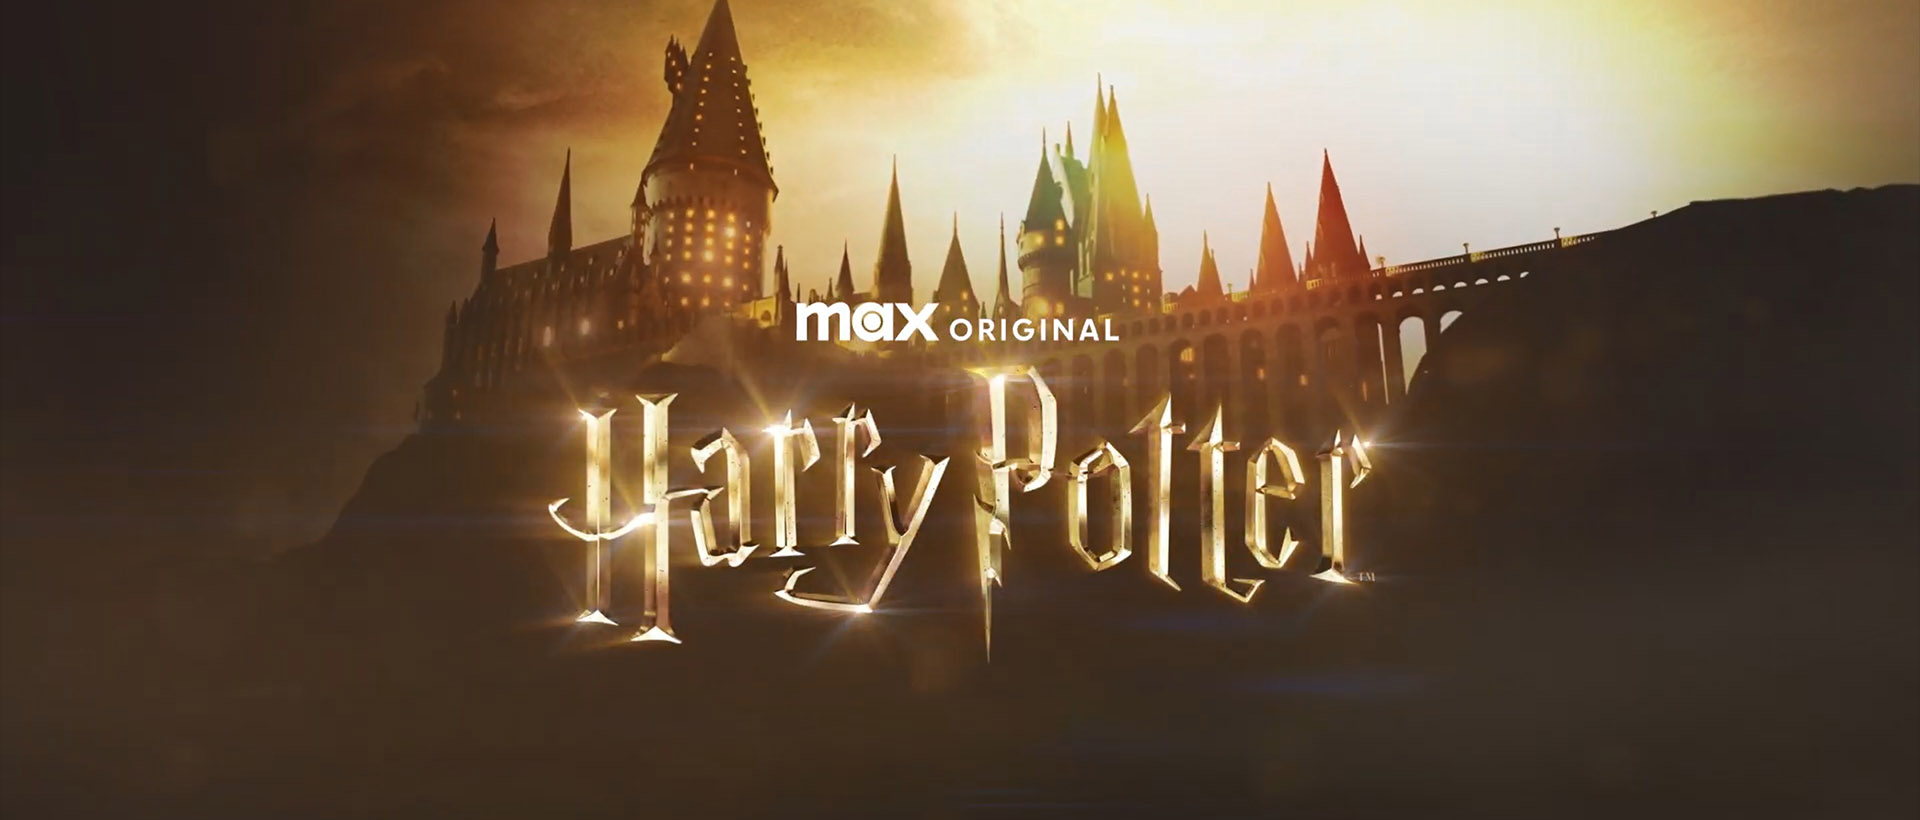 harry potter max tv series 2023 banner